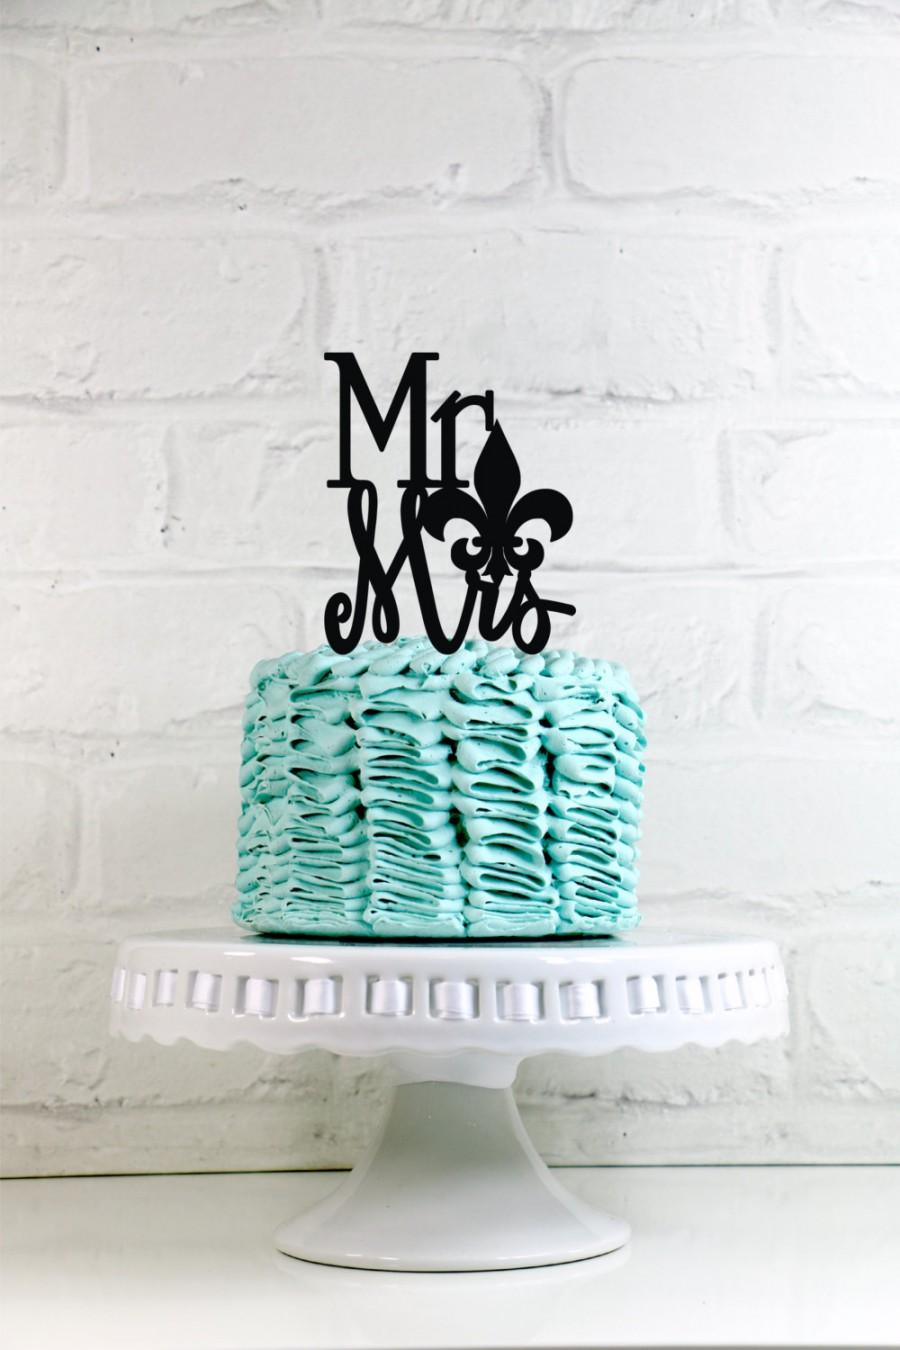 Mariage - Mr & Mrs Fleur de lis Wedding Cake Topper or Sign Perfect for New Orleans themed Weddings